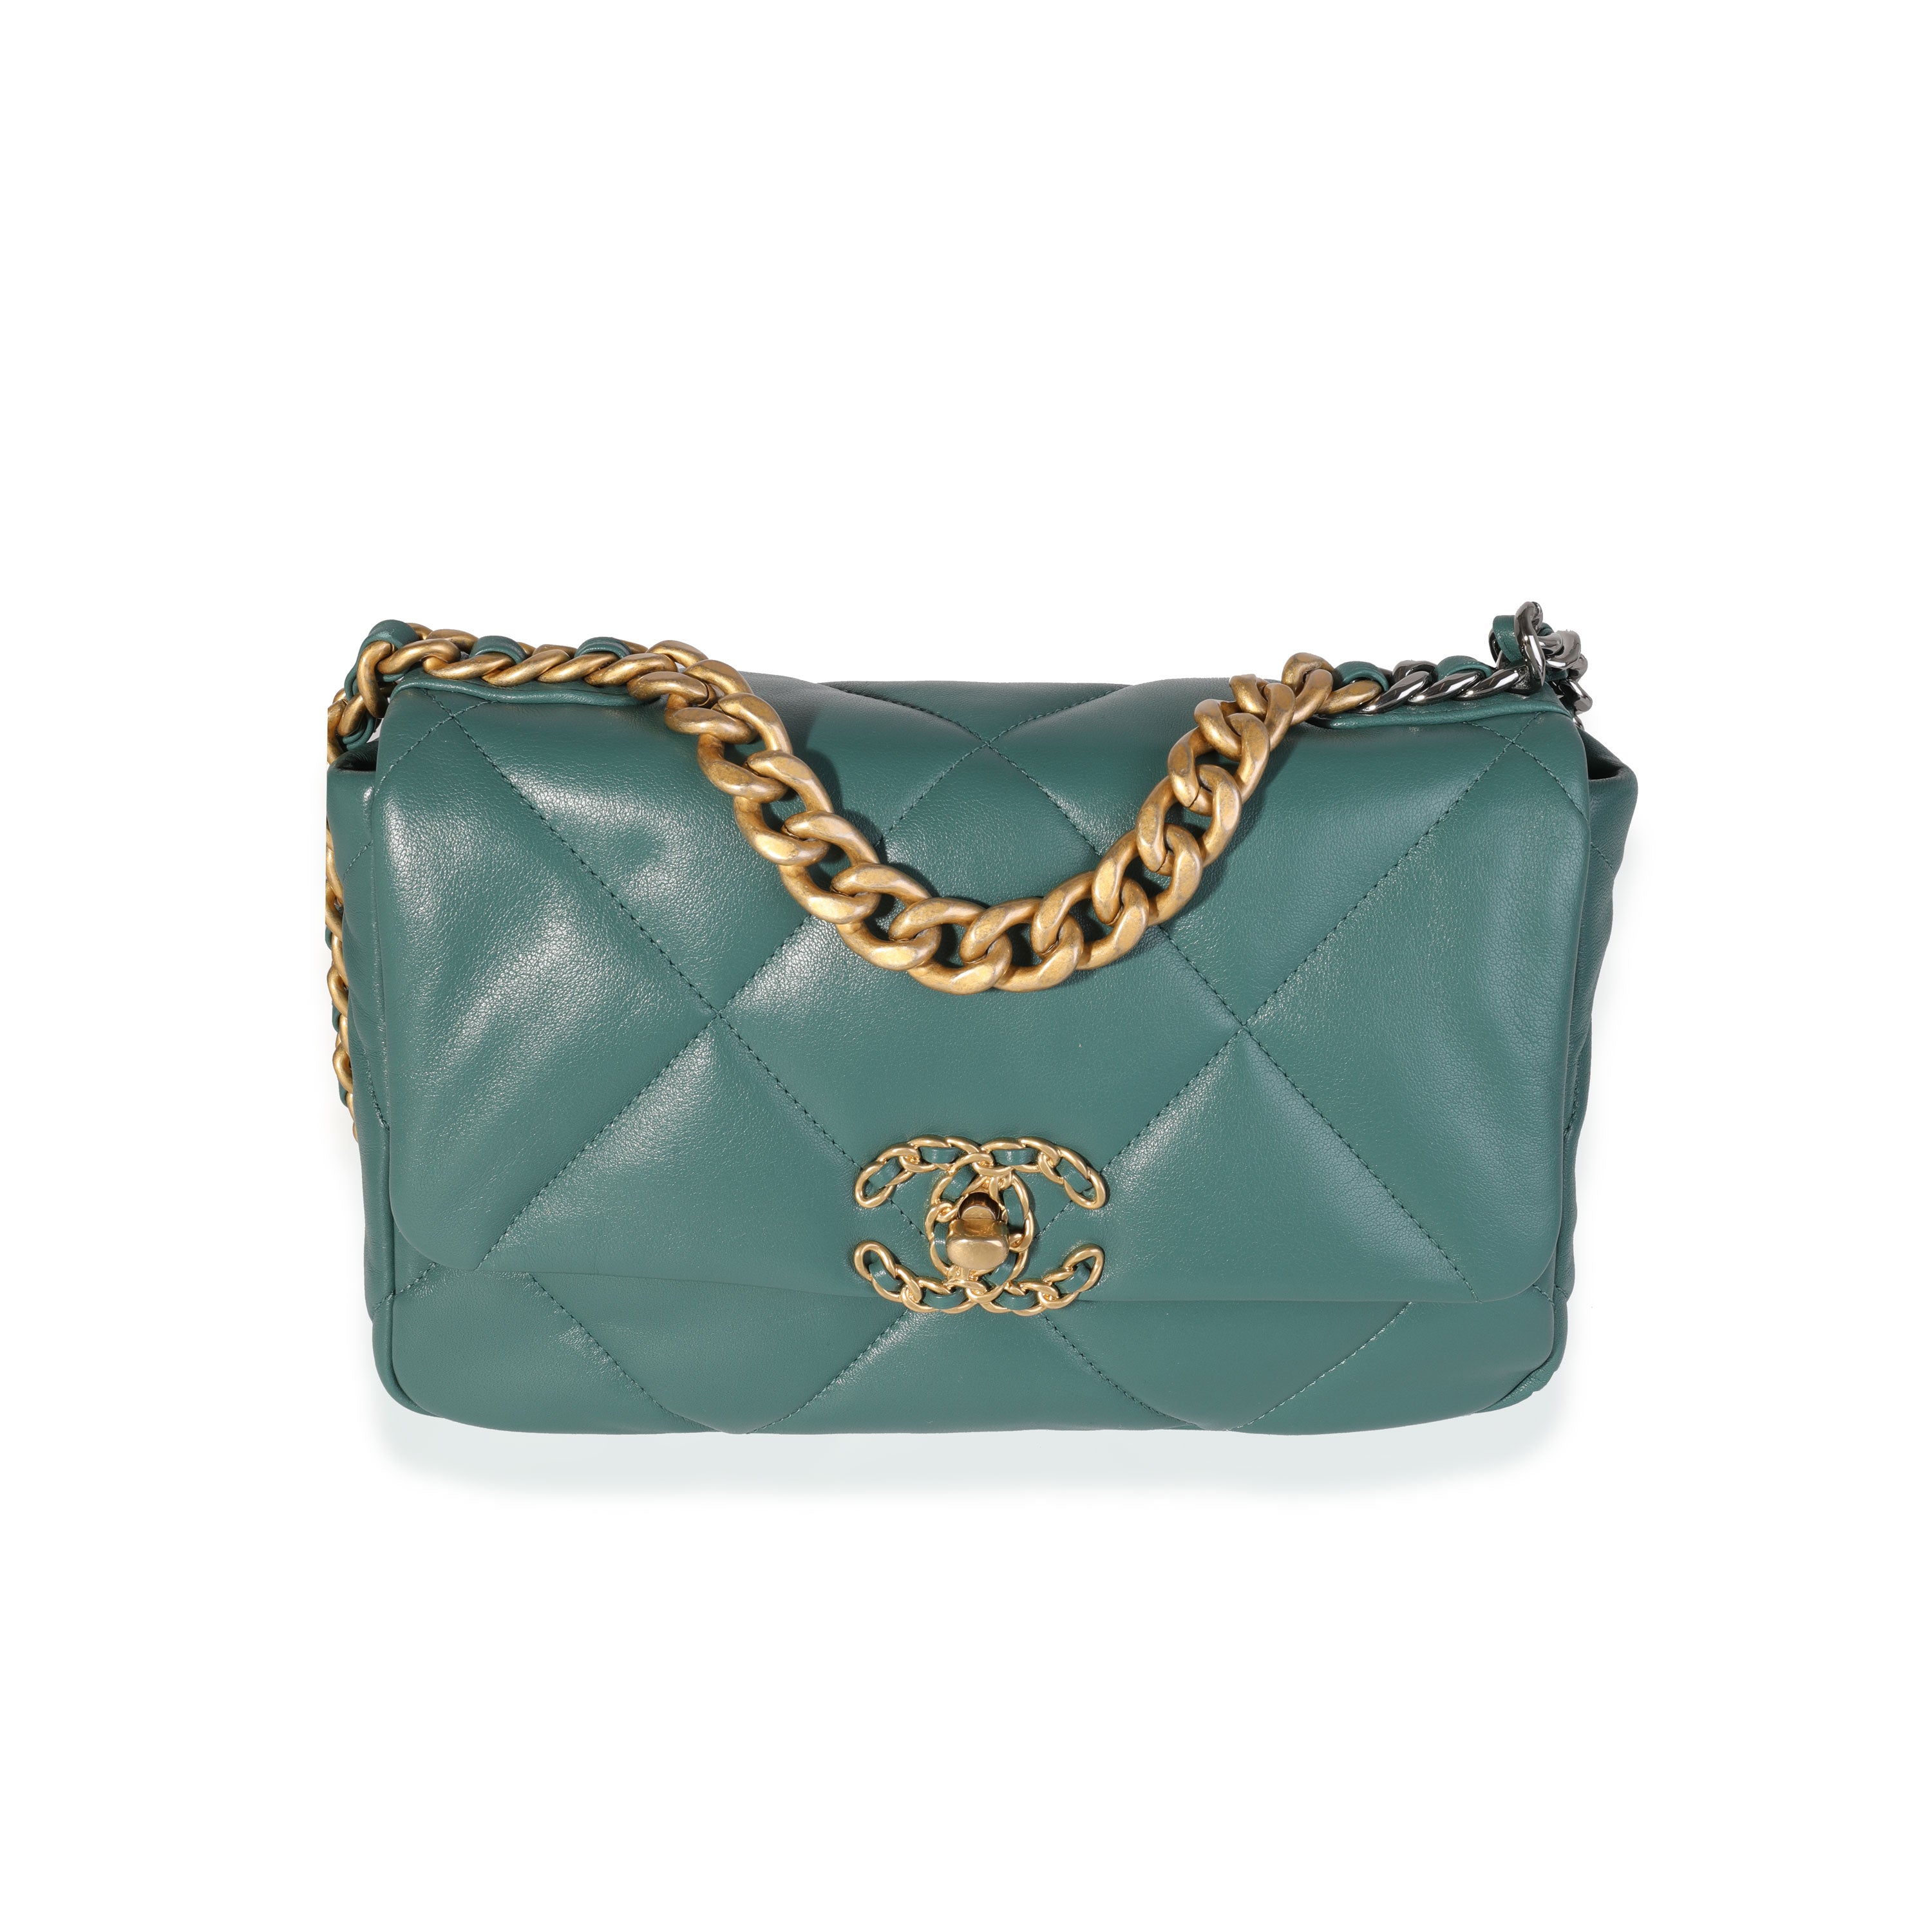 Chanel 19 leather handbag Chanel Green in Leather - 34968035